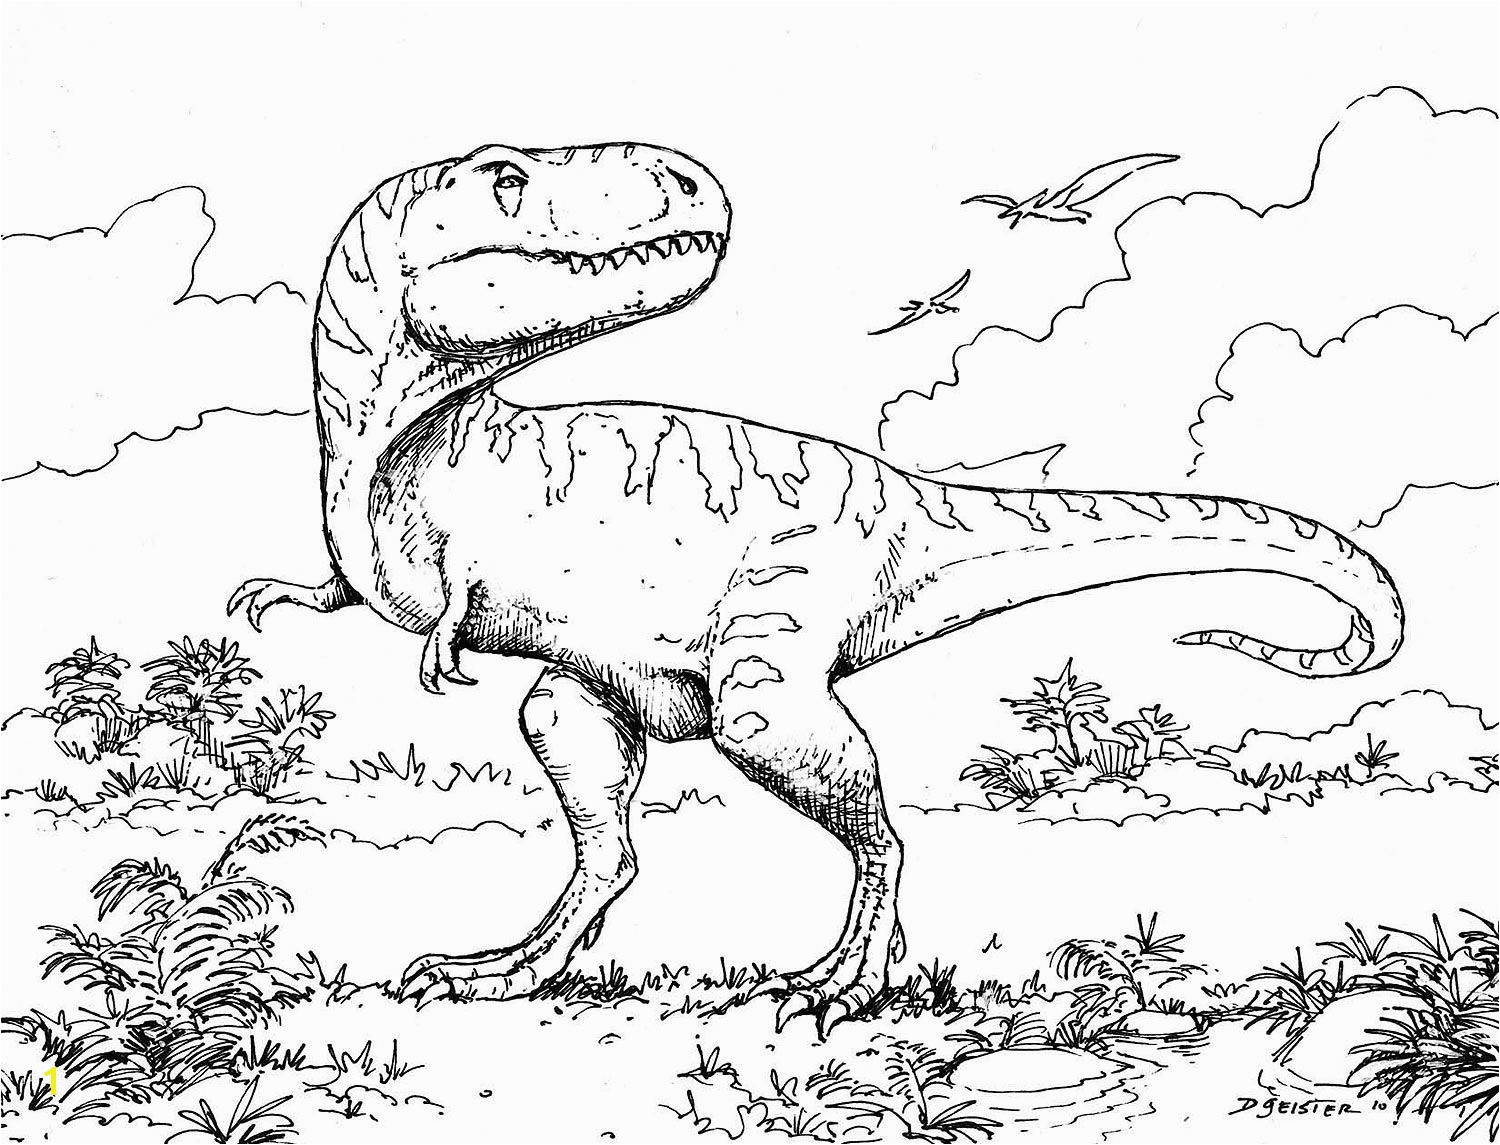 Coloring Pages Of Dinosaurs for Preschoolers Free Printable Dinosaur Coloring Pages for Kids Fun